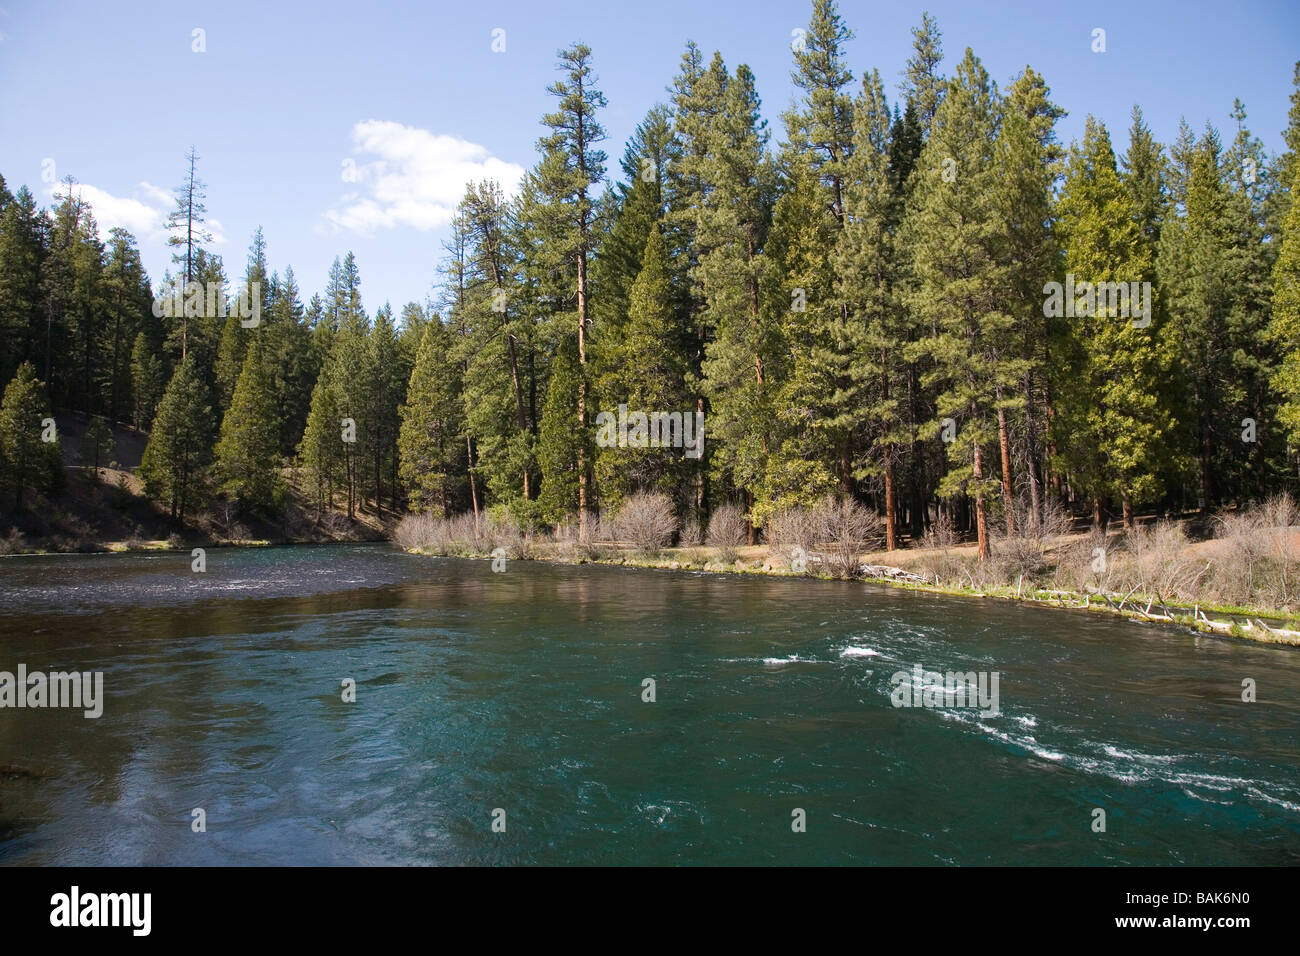 USA OREGON A view of the ponderosa pine trees along the Metolius River in the Cascade Mountains of central Oregon Stock Photo